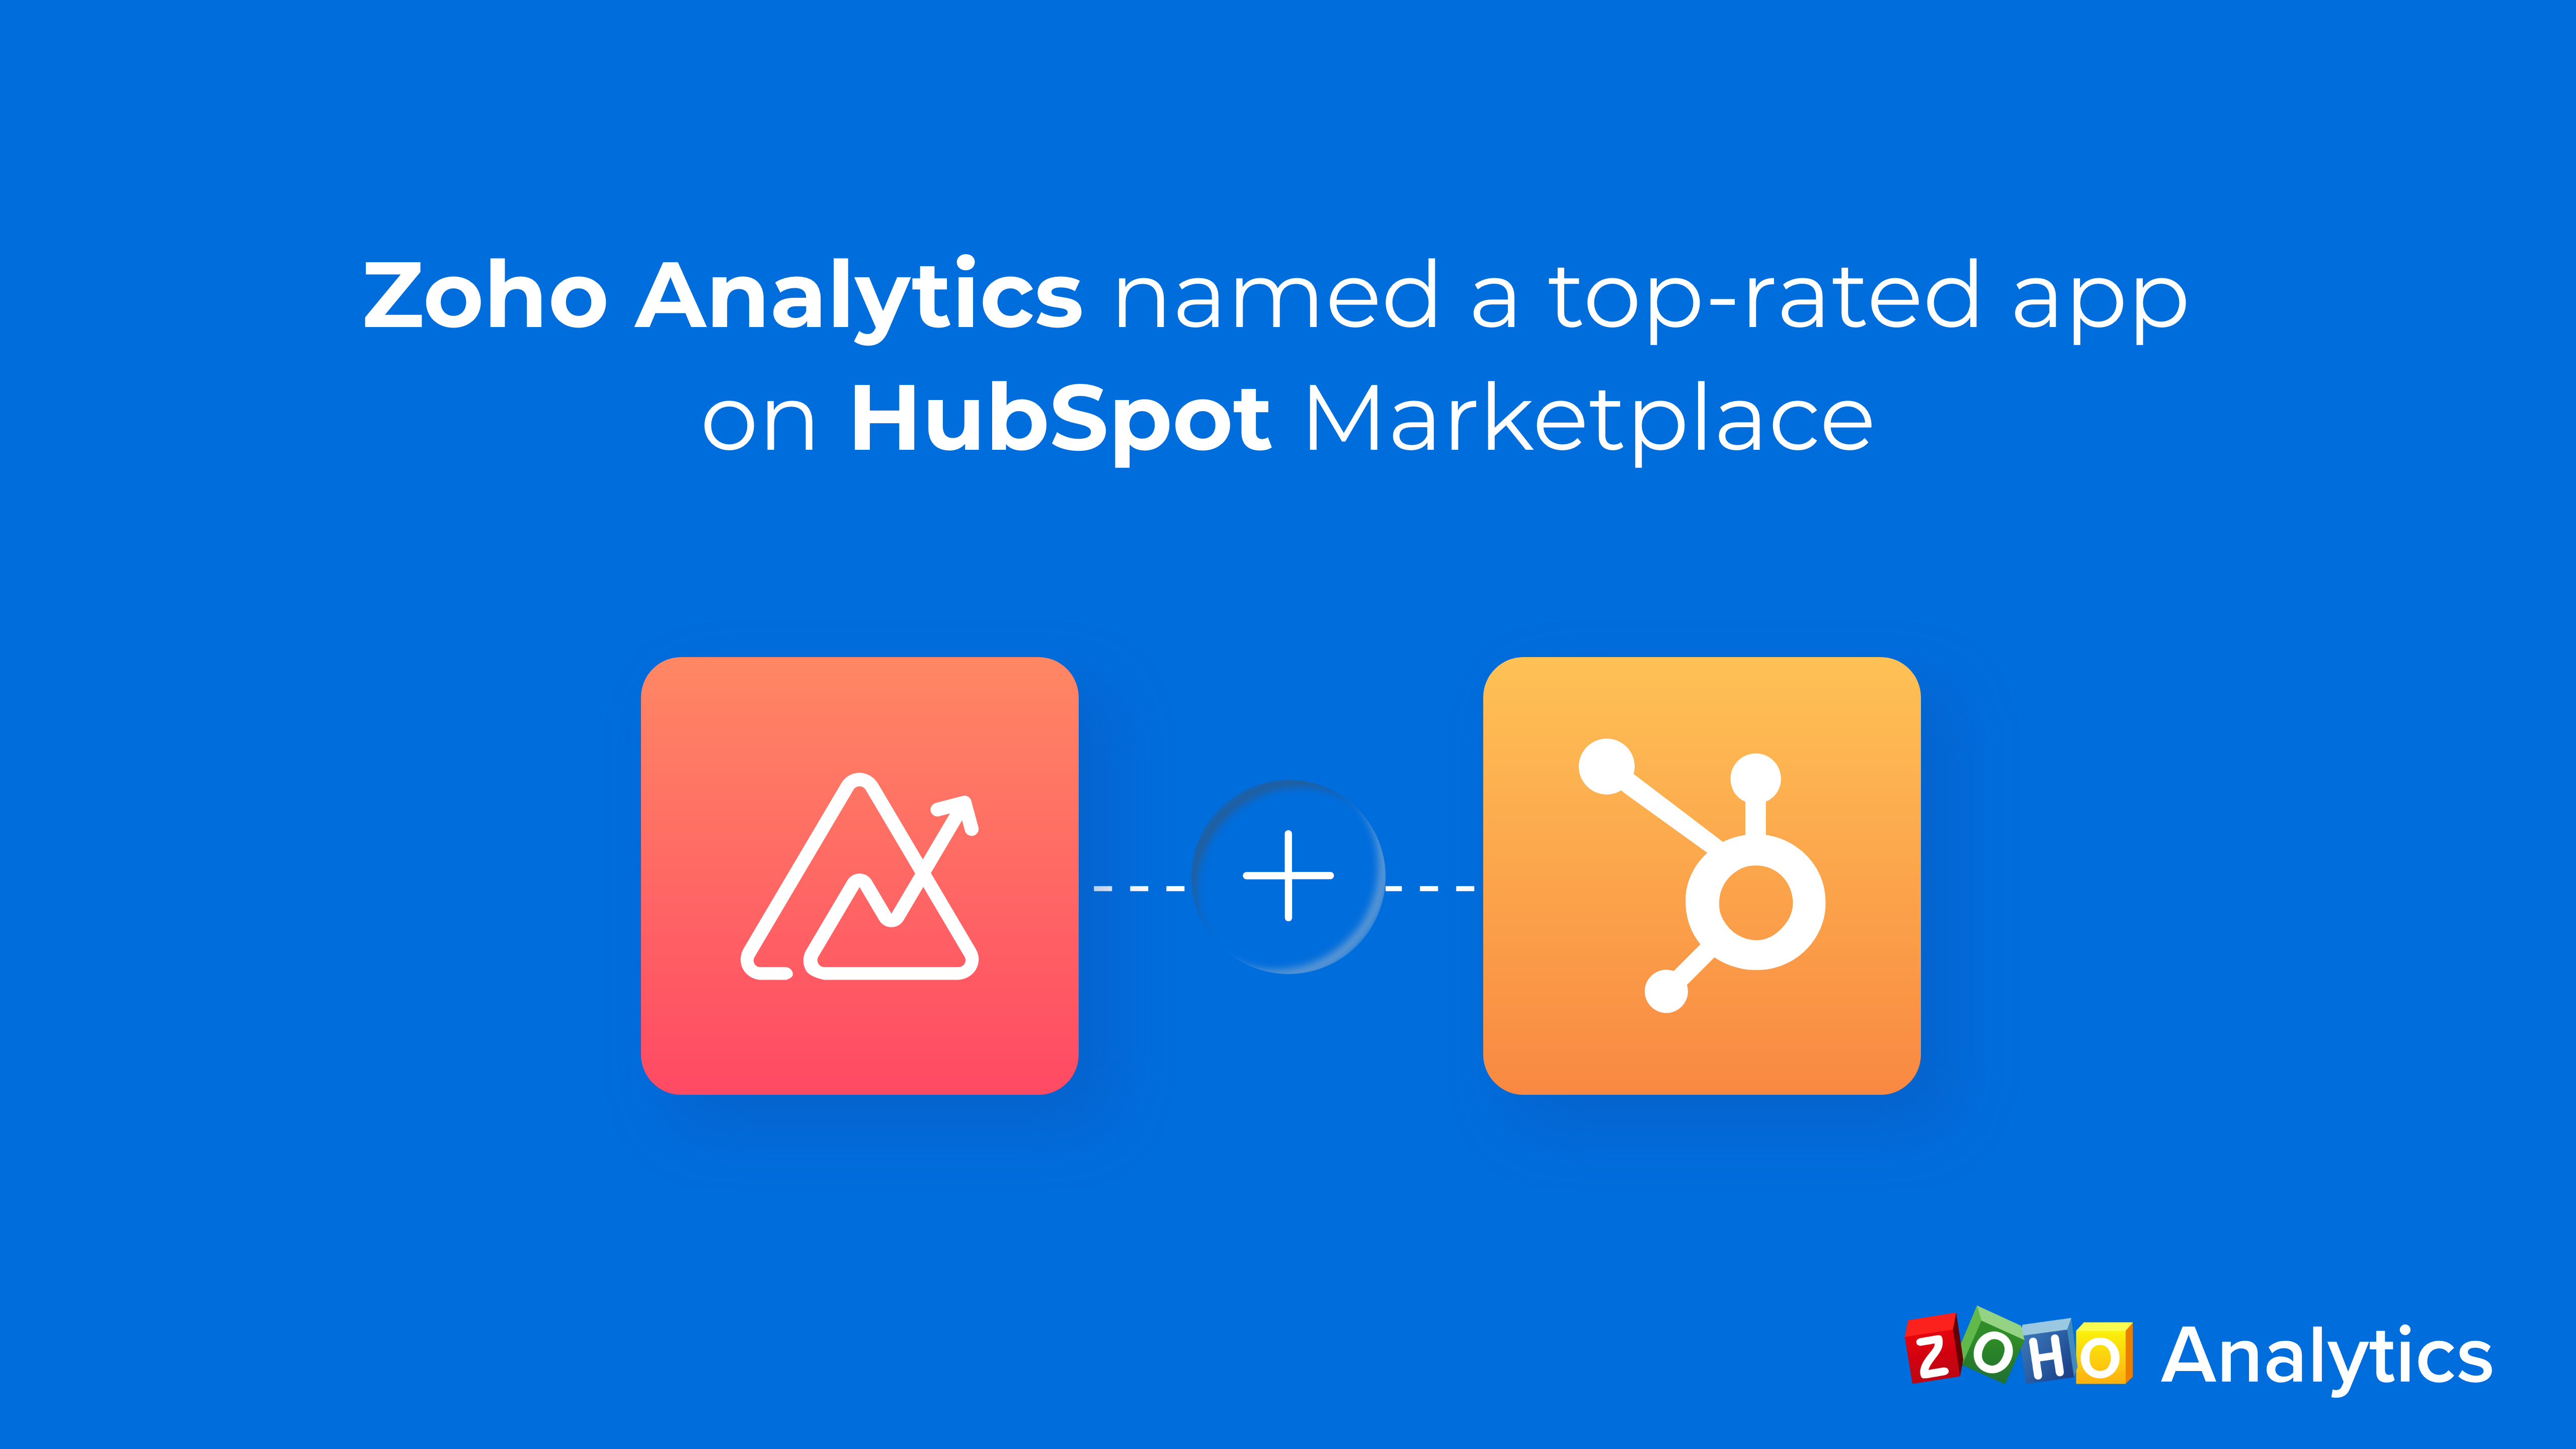 Zoho Analytics named a top-rated app on HubSpot Marketplace